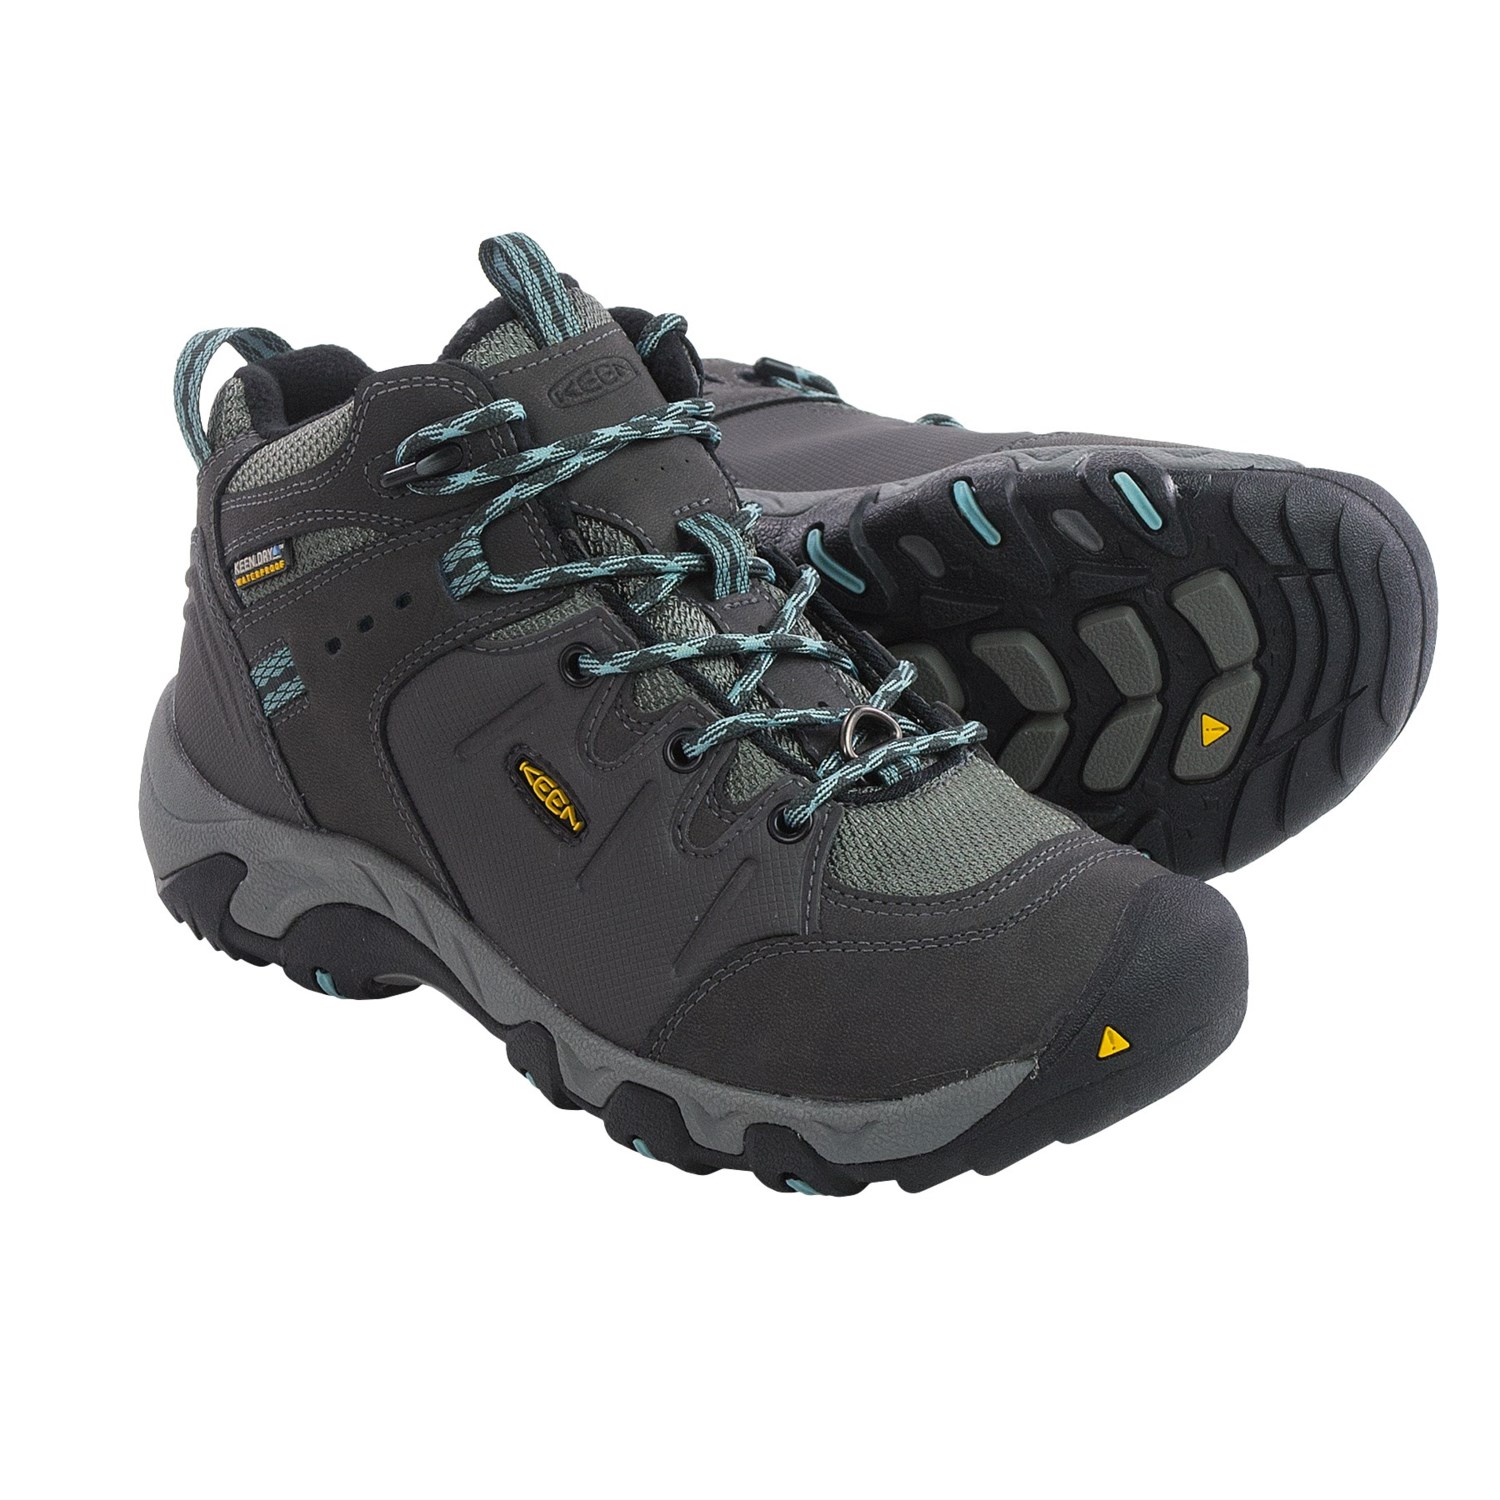 Keen Koven Polar Winter Shoes (For Women) 107WD - Save 57%